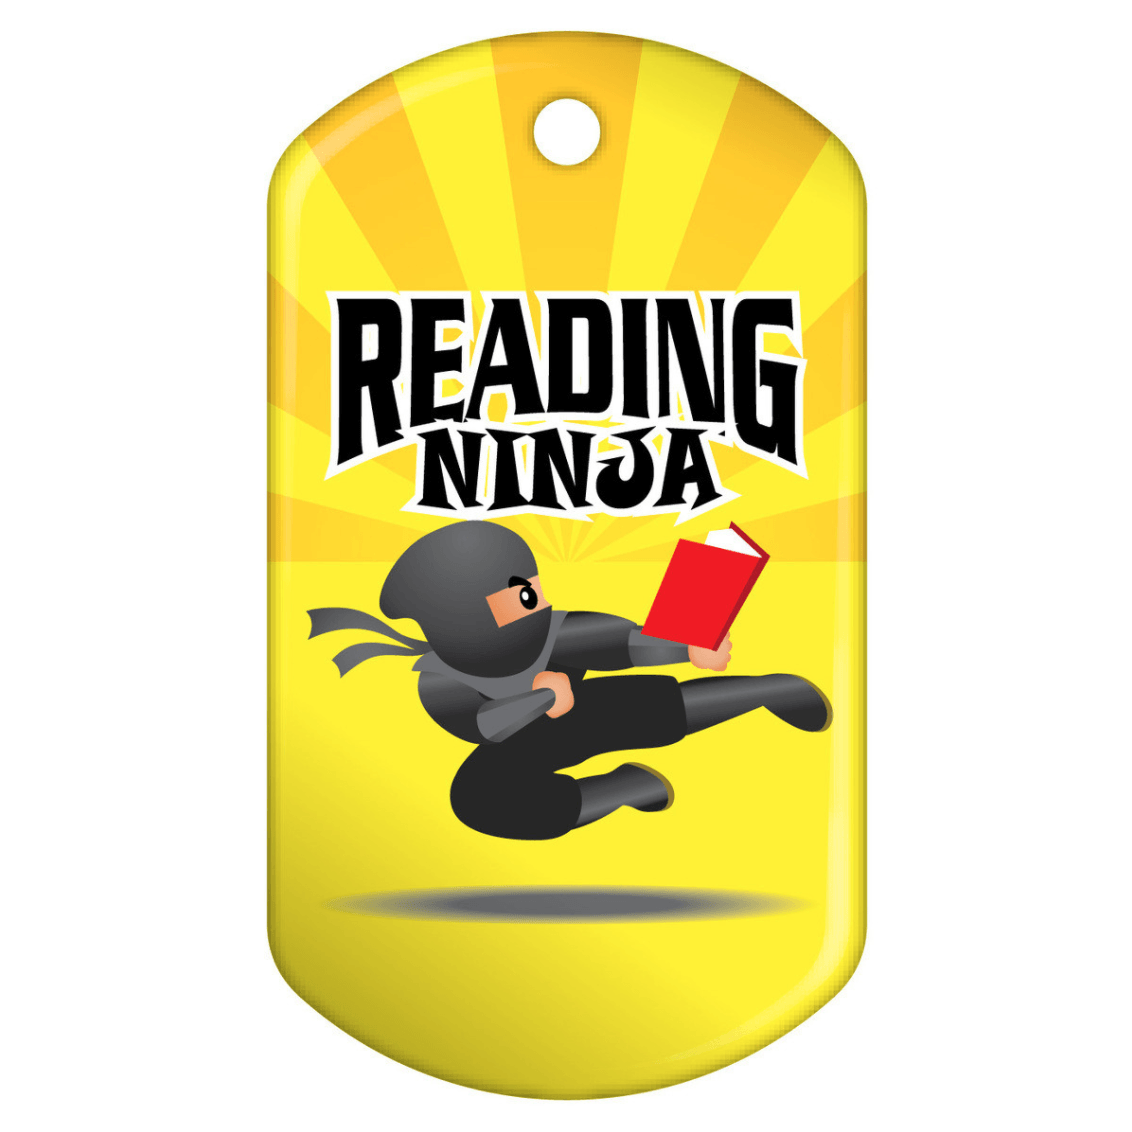 Reading Ninja Brag Tags Classroom Rewards - Pack of 10:Primary Classroom Resources